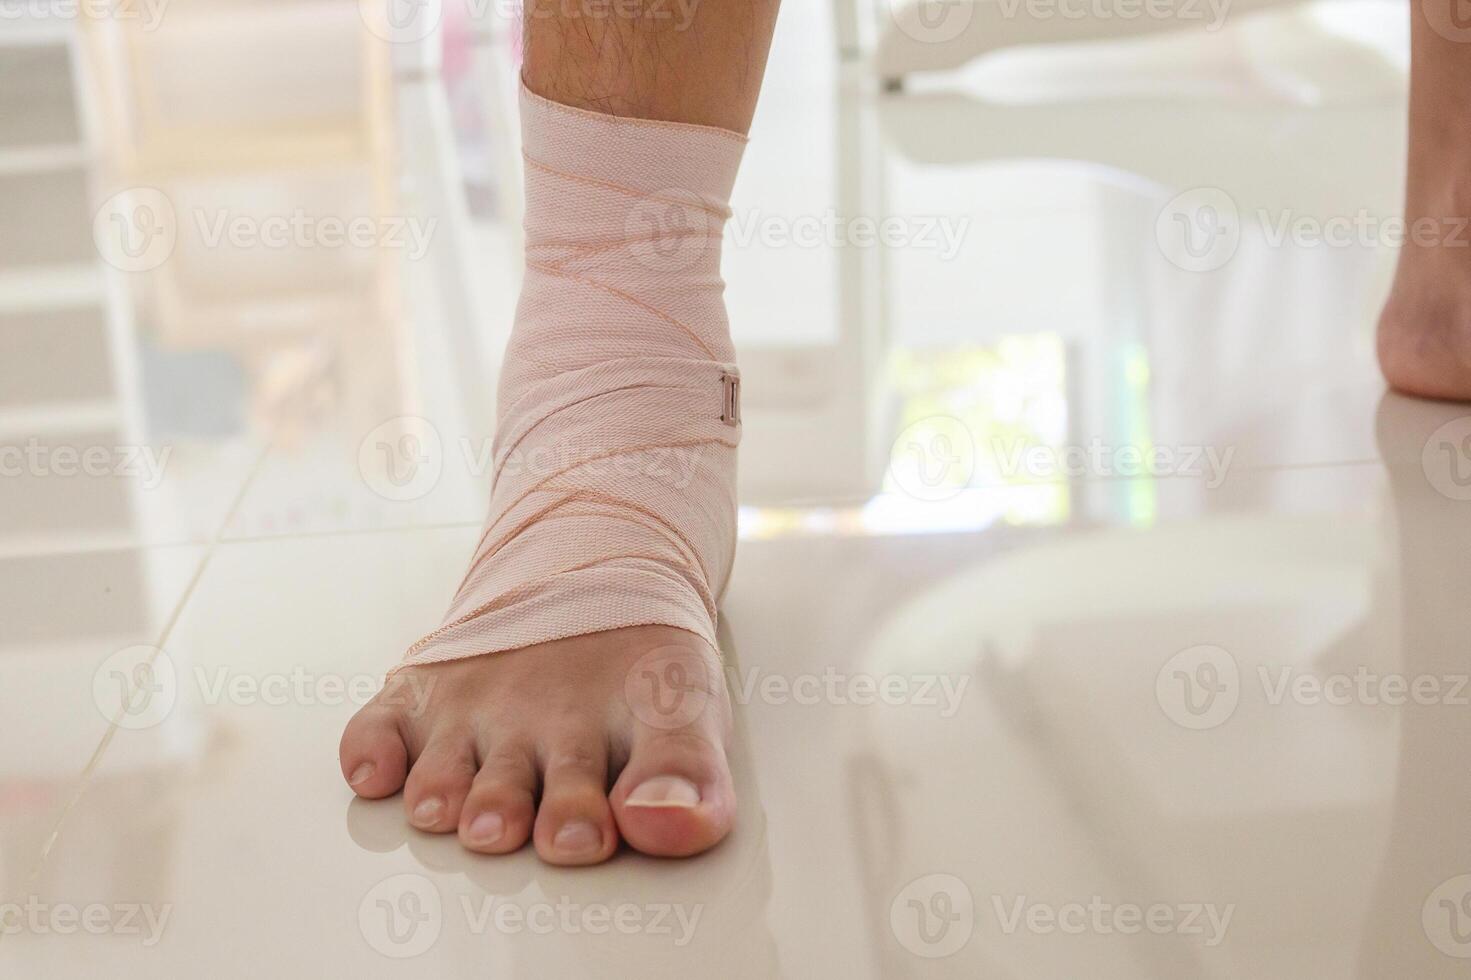 Man with ankle sprain elastic bandage for ankle injury and feeling pain photo